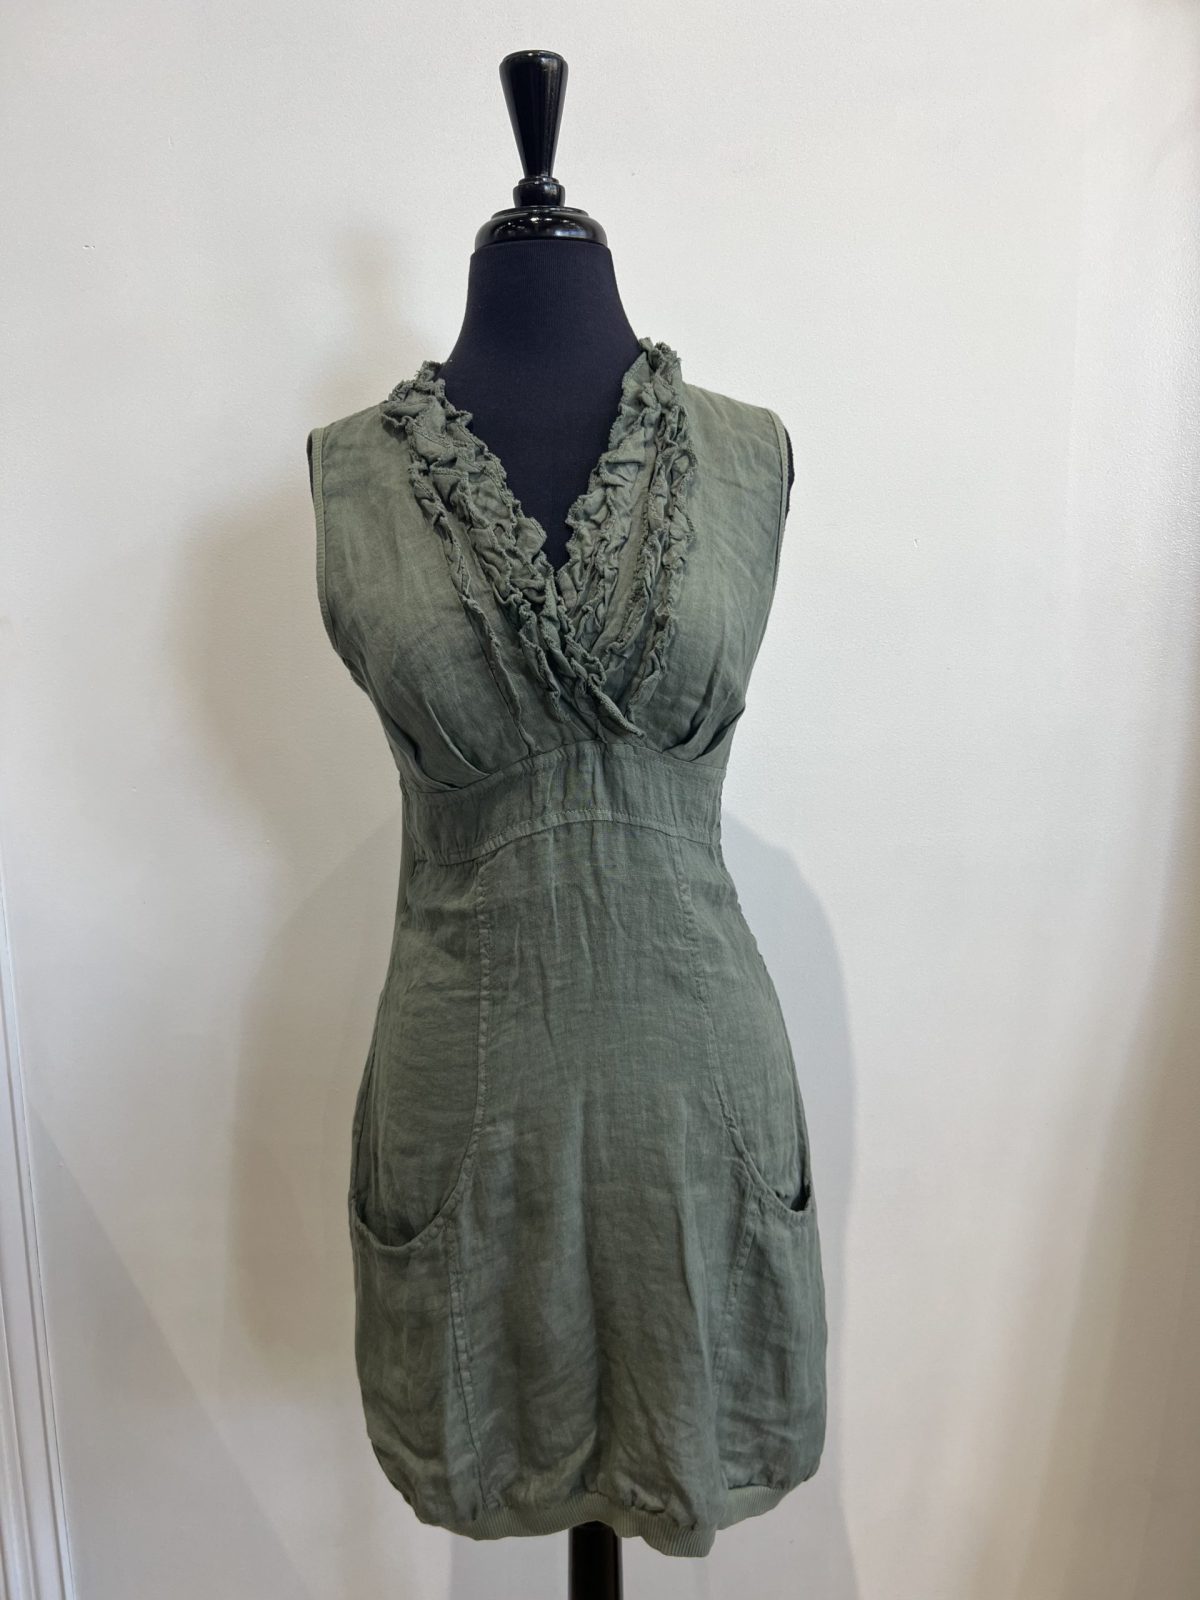 Look Mode 3131 Olive Linen V Neck Triple Ruffle Top Dress | Ooh Ooh Shoes women's clothing and shoe boutique located in Naples and Mashpee